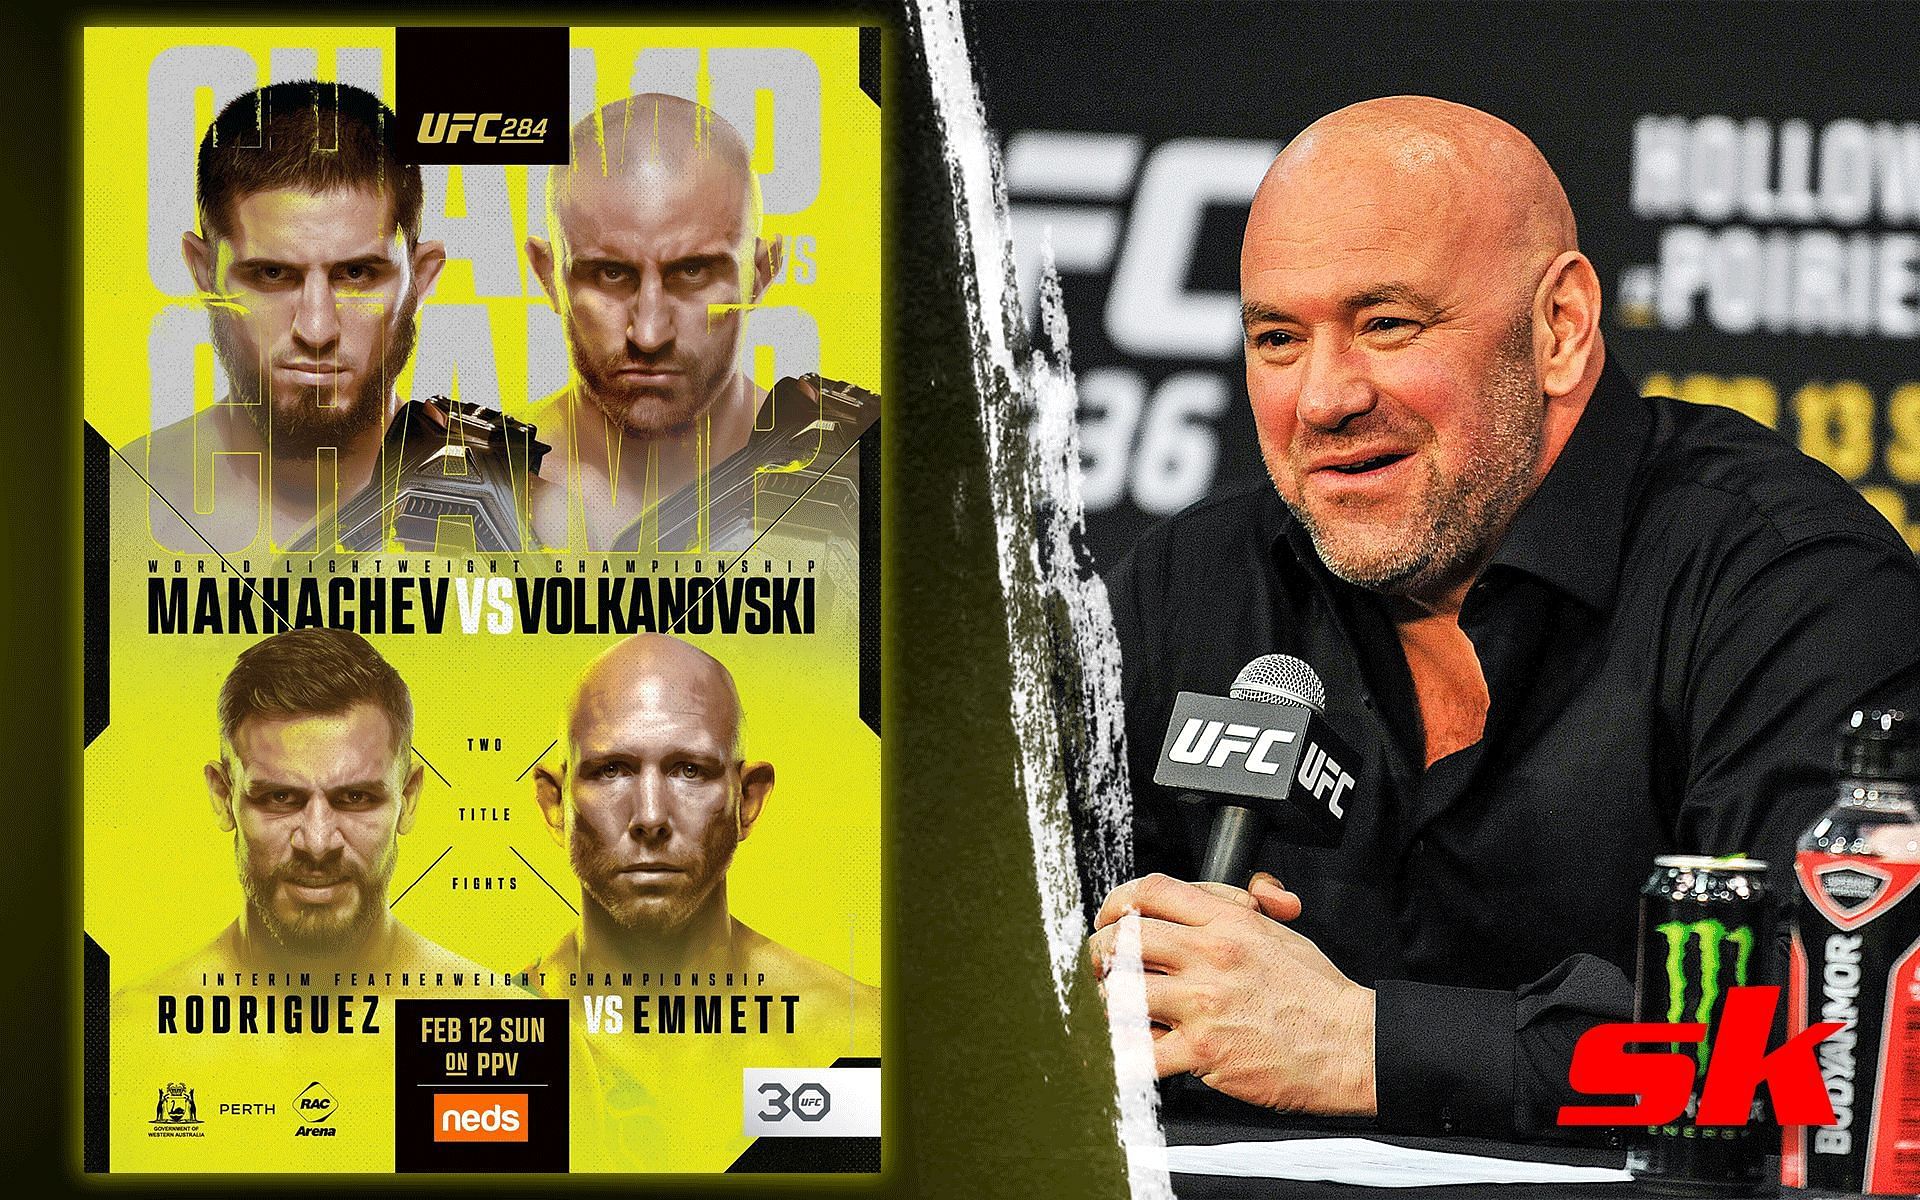 Dana White claims UFC 284 headlined by Islam Makhachev vs. Alex Volkanovski will be among the 5 biggest events in UFC history [Images via: @UFC_AUSNZ on Twitter]